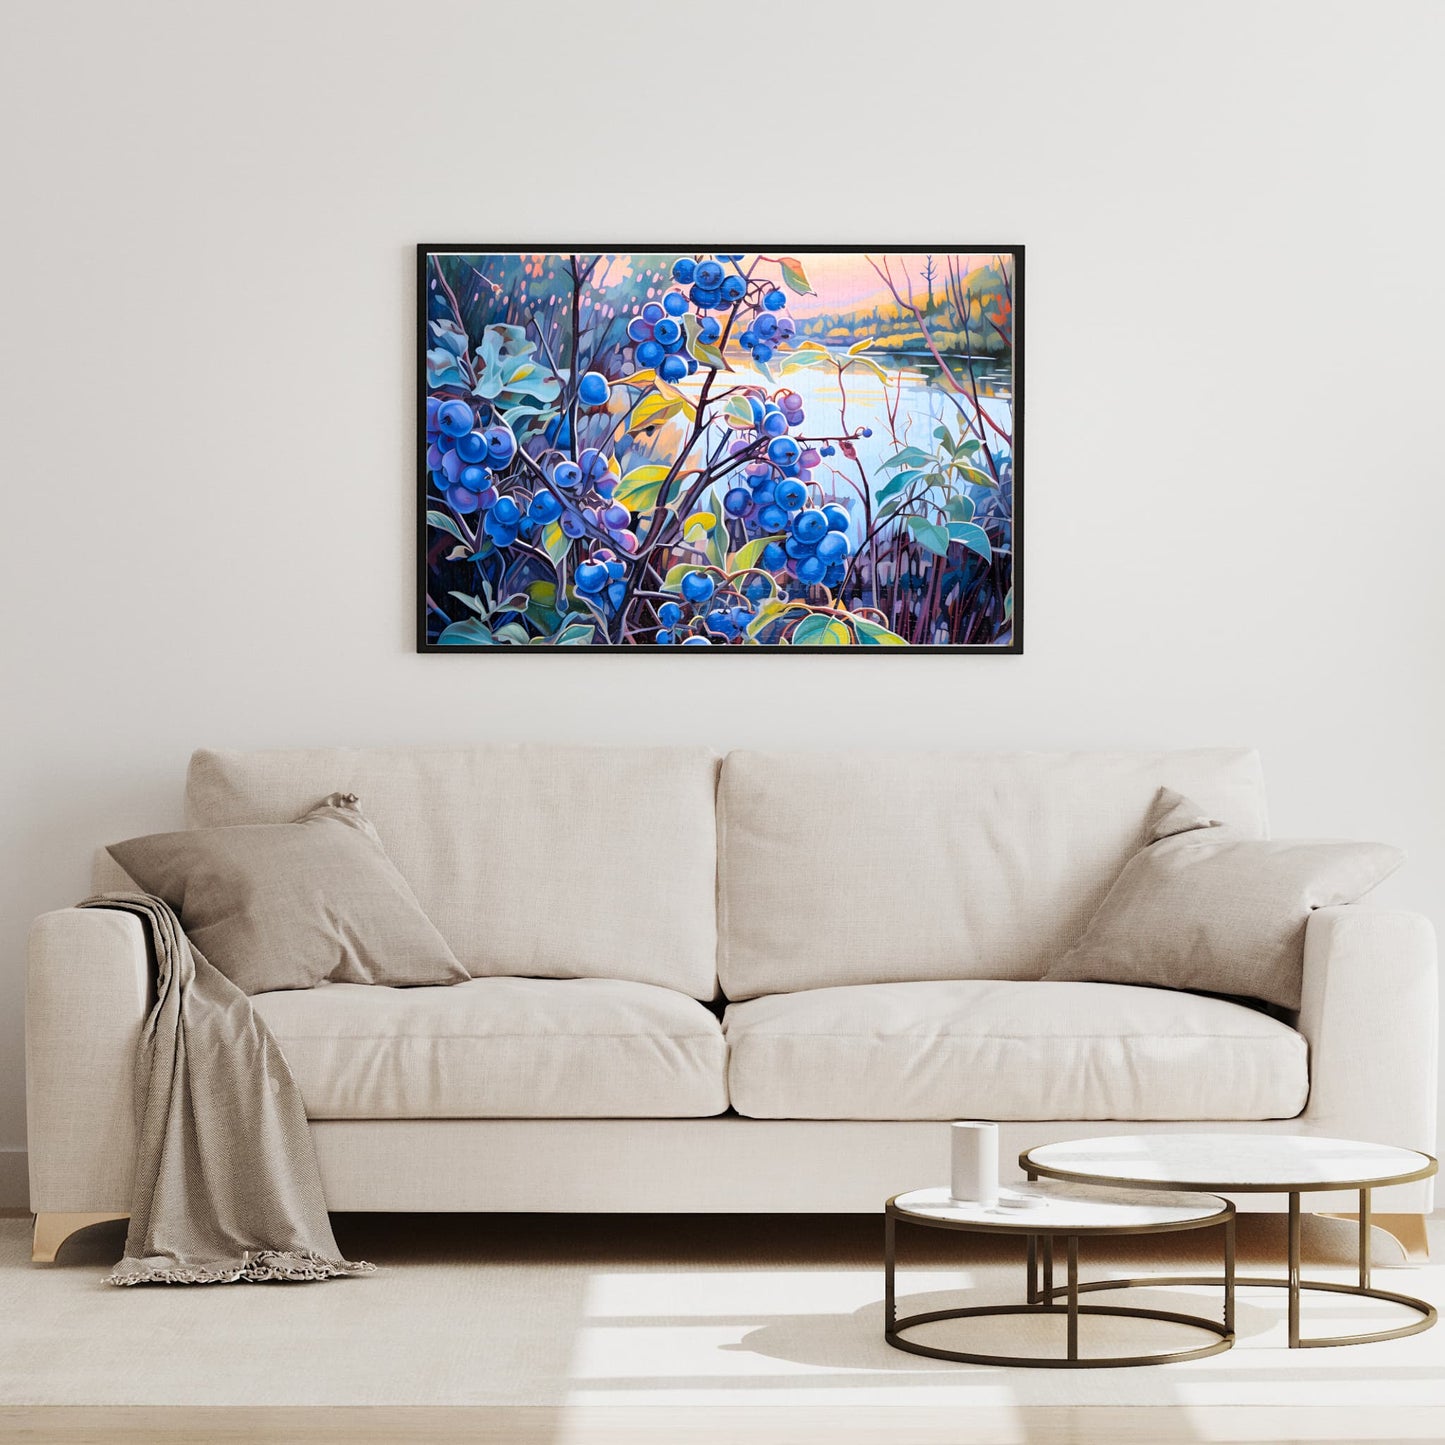 Framed 1000-piece Impressionist Blueberry Bush puzzle displayed elegantly on a living room wall